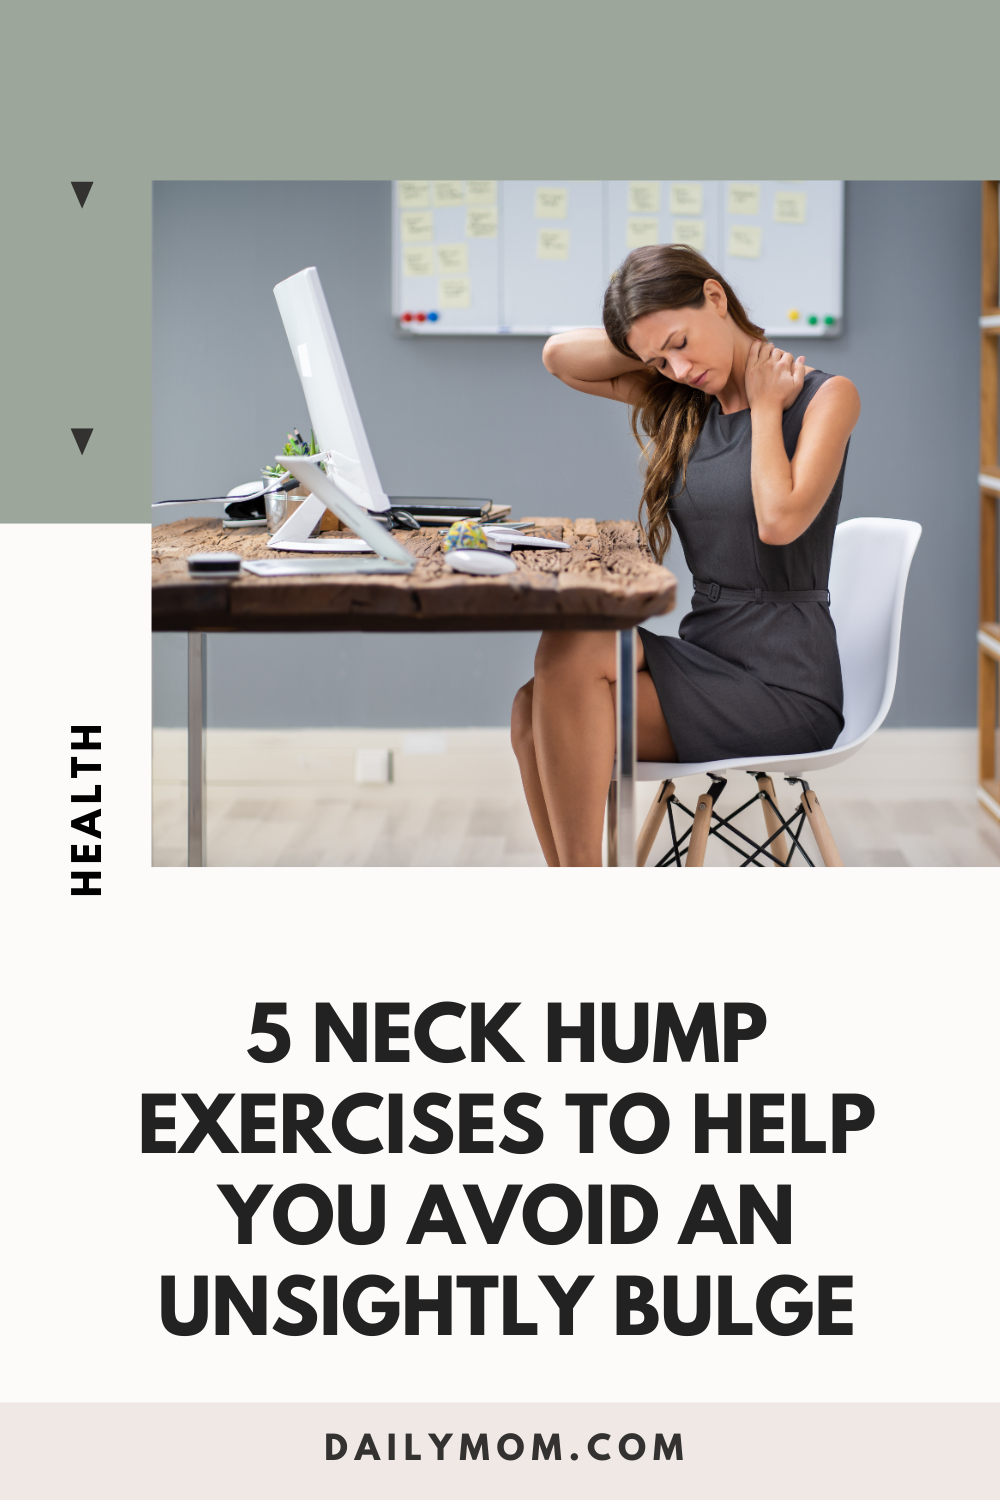 5 Neck Hump Exercises To Help You Avoid An Unsightly Bulge